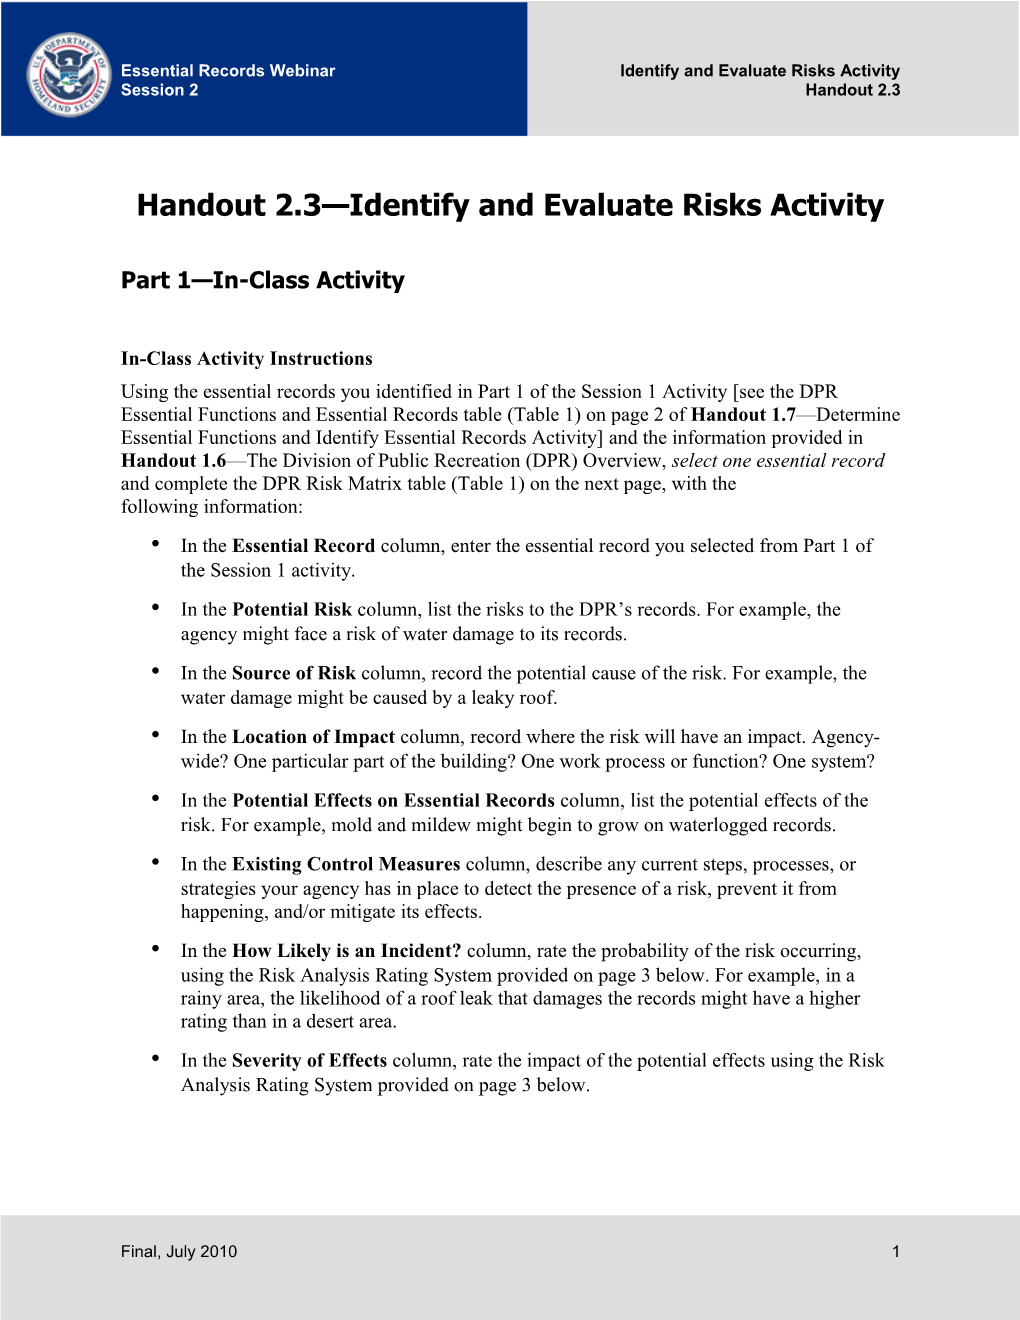 Handout 2.3 Identify and Evaluate Risks Activity Part 2